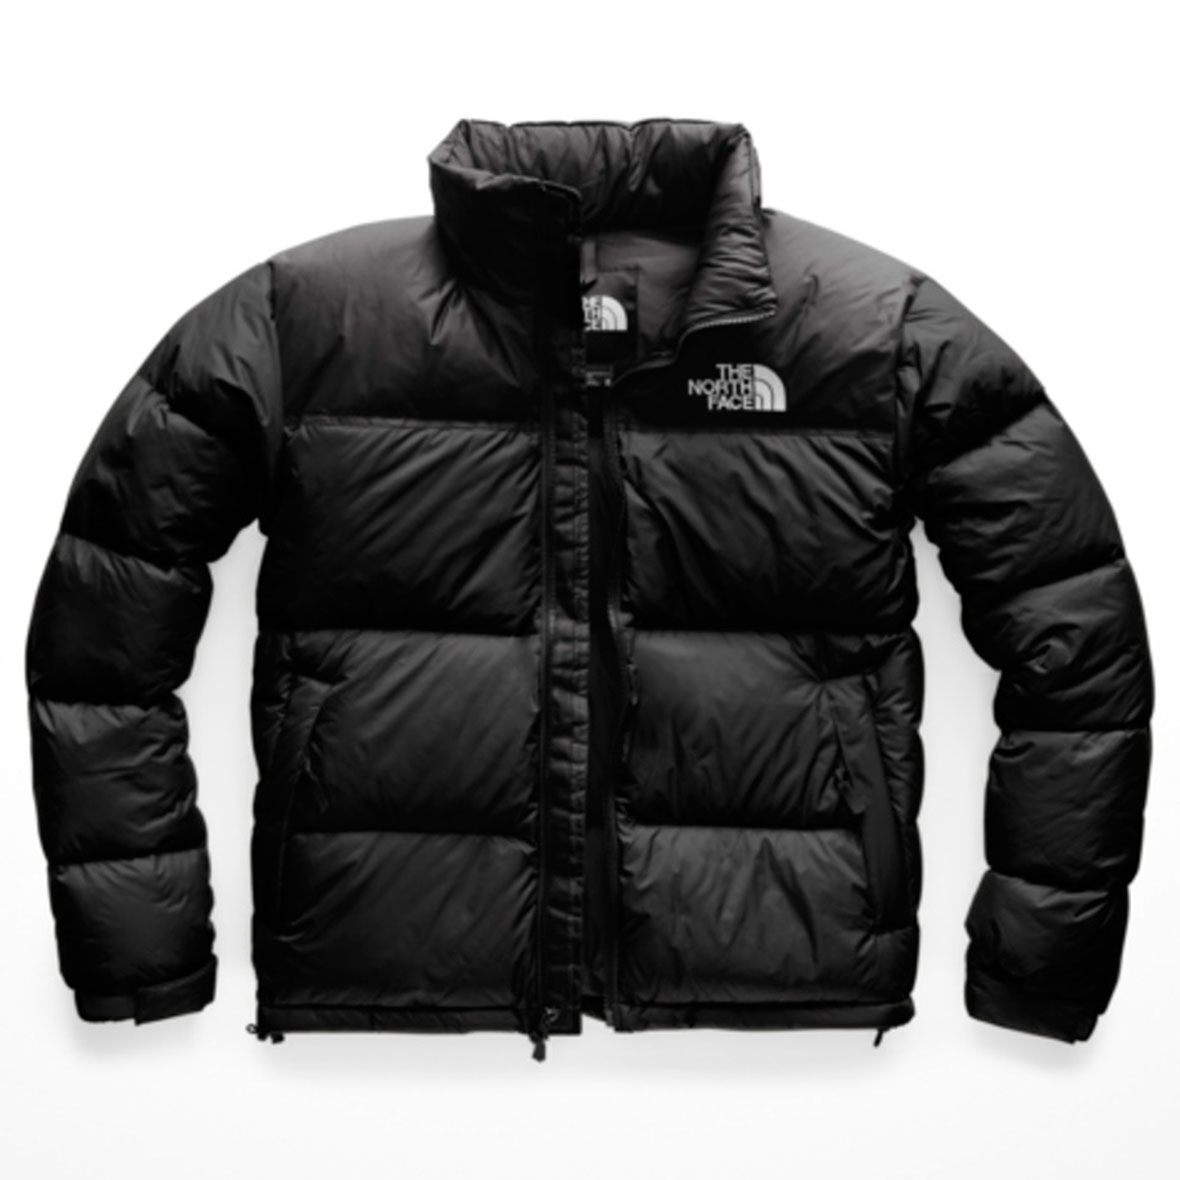 shops that sell north face